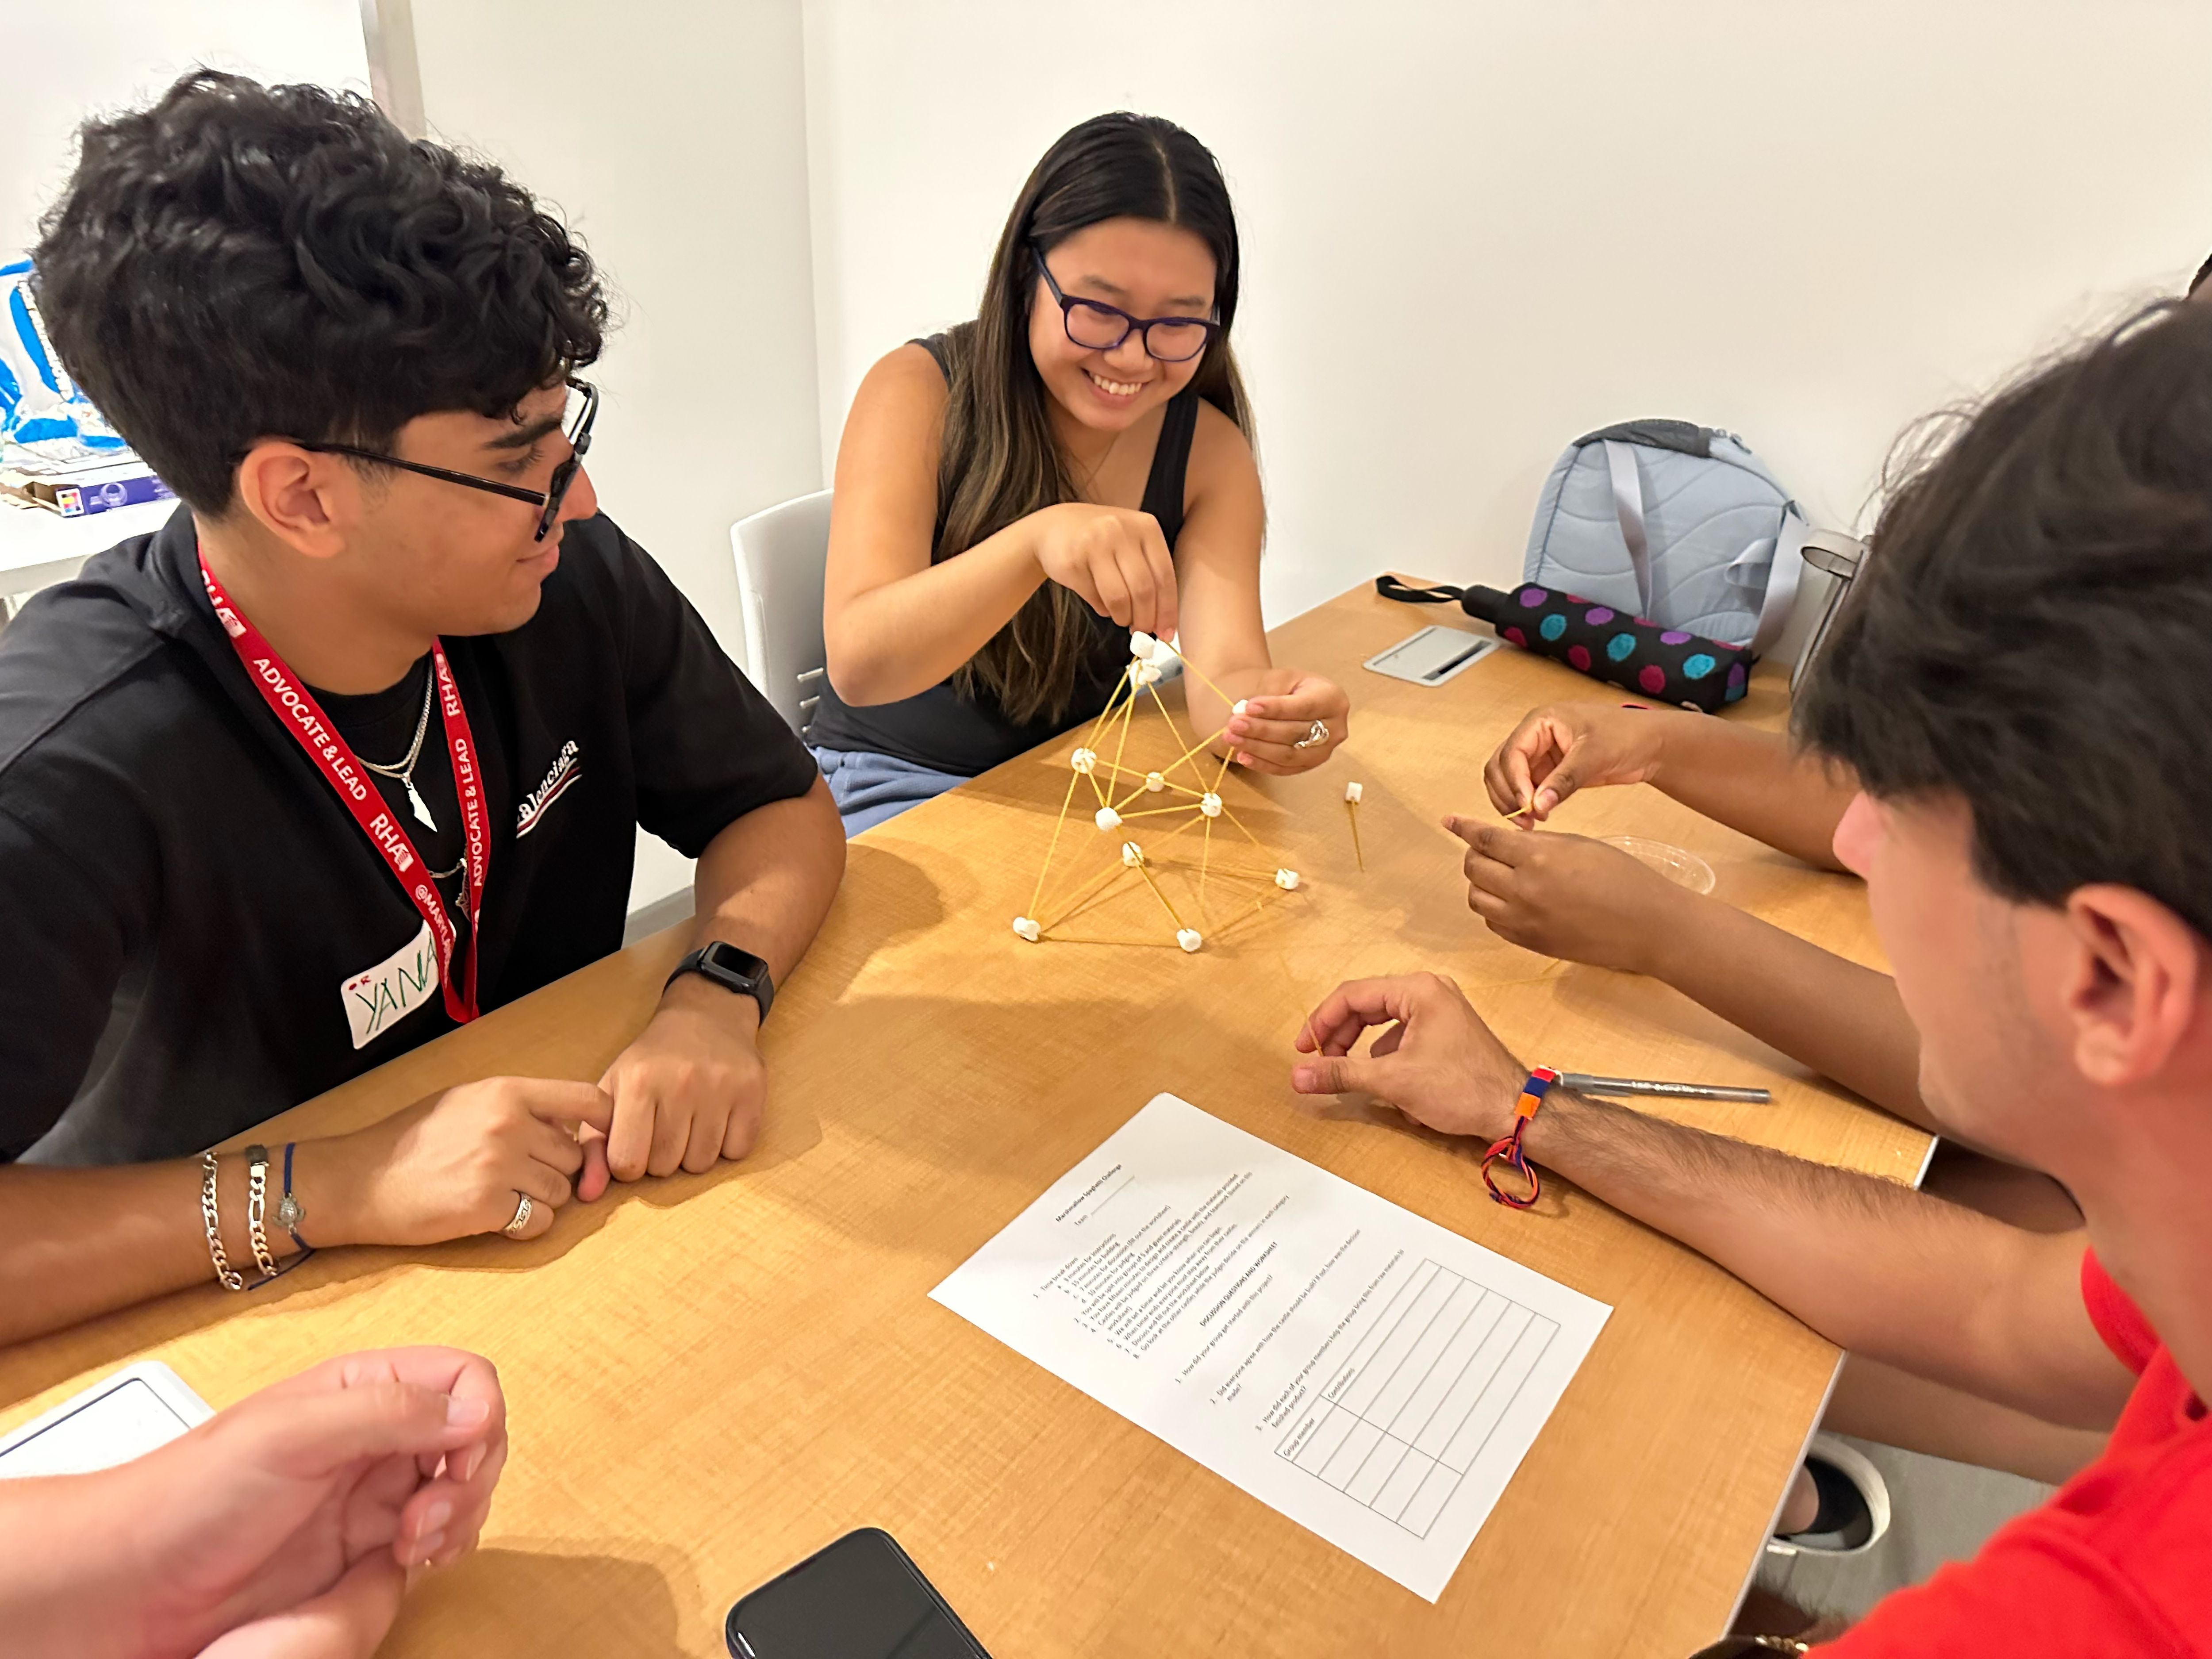 Students work together to build a castle out of spaghetti noodles and miniature marshmallows as part of a team-building competition.